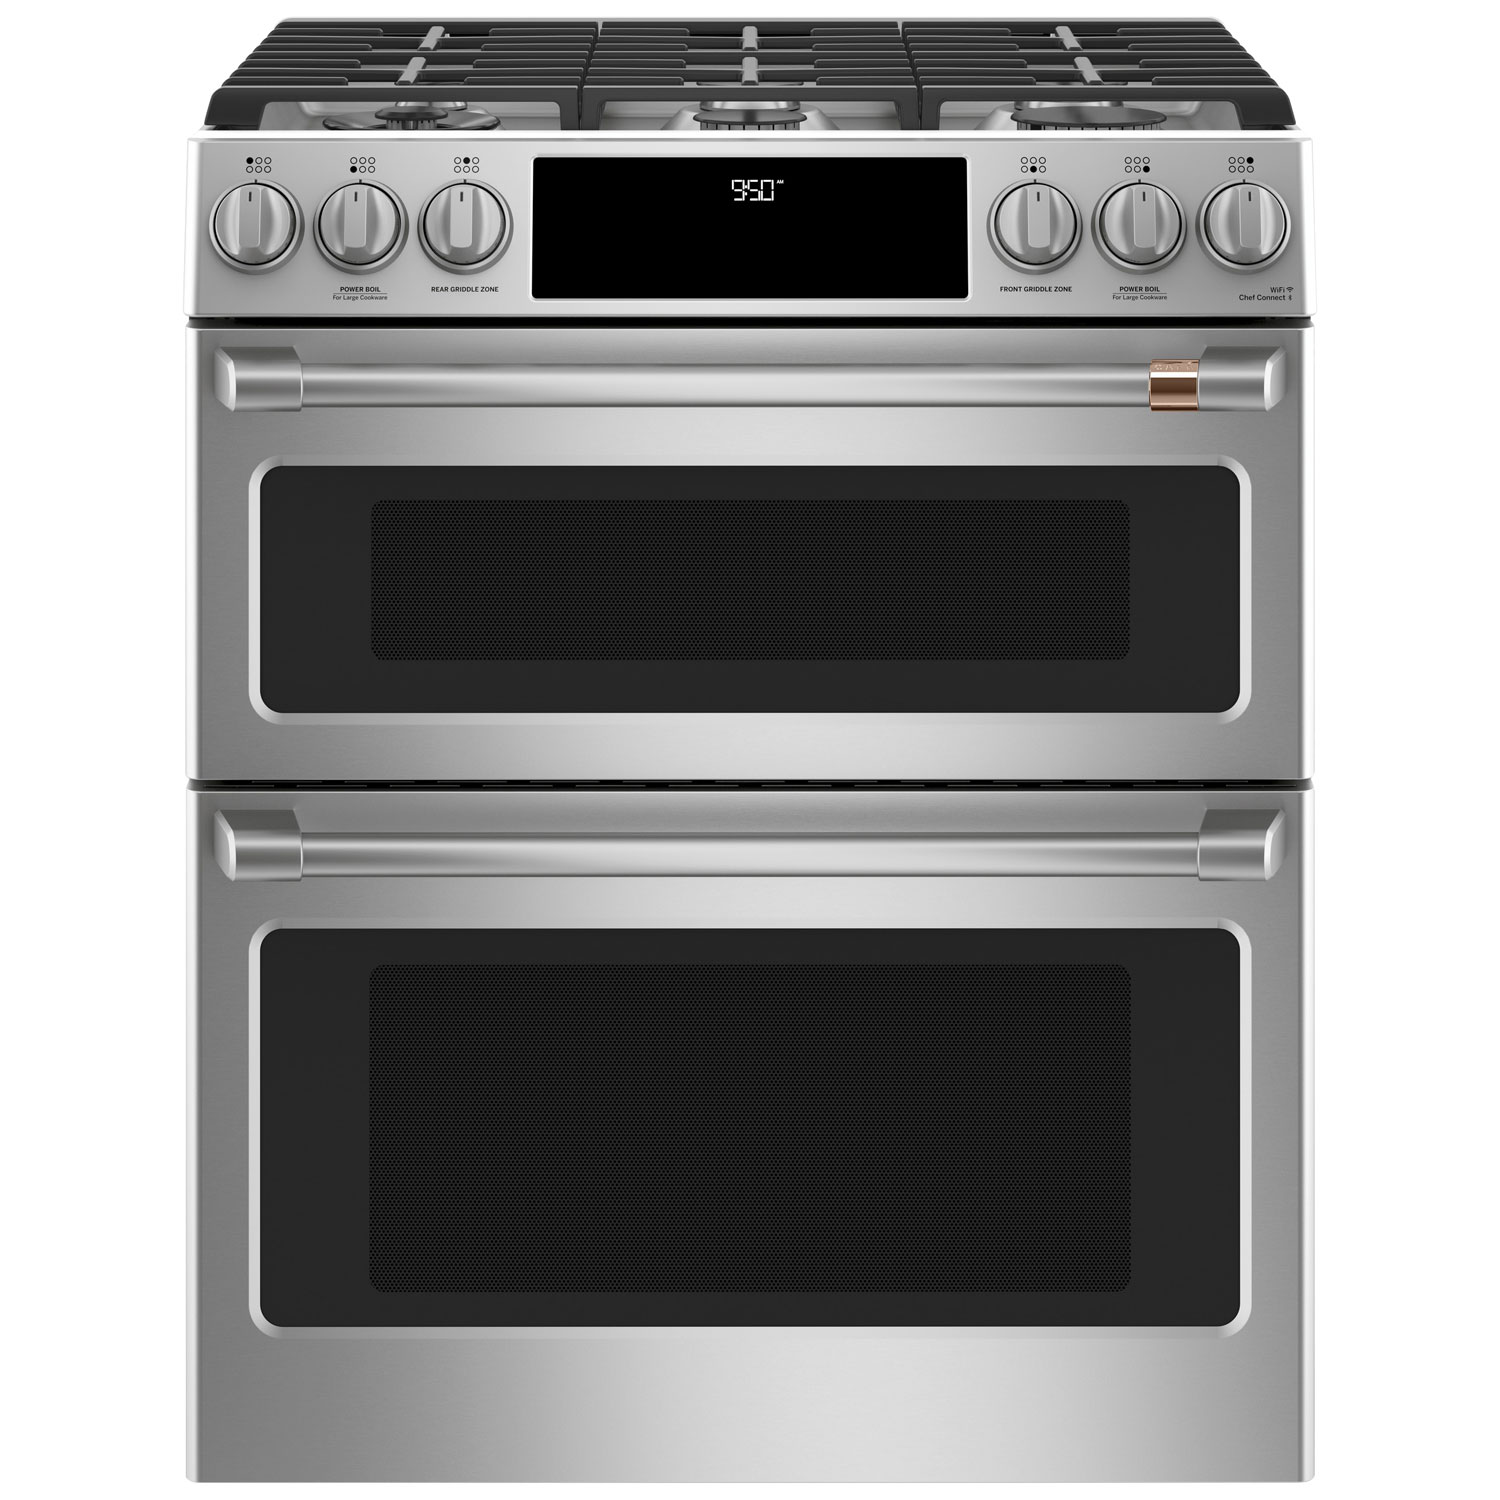 Café 30" Self-Clean True Convection Double Oven Slide-In Gas Range (CC2S950P2MS1) - Stainless Steel